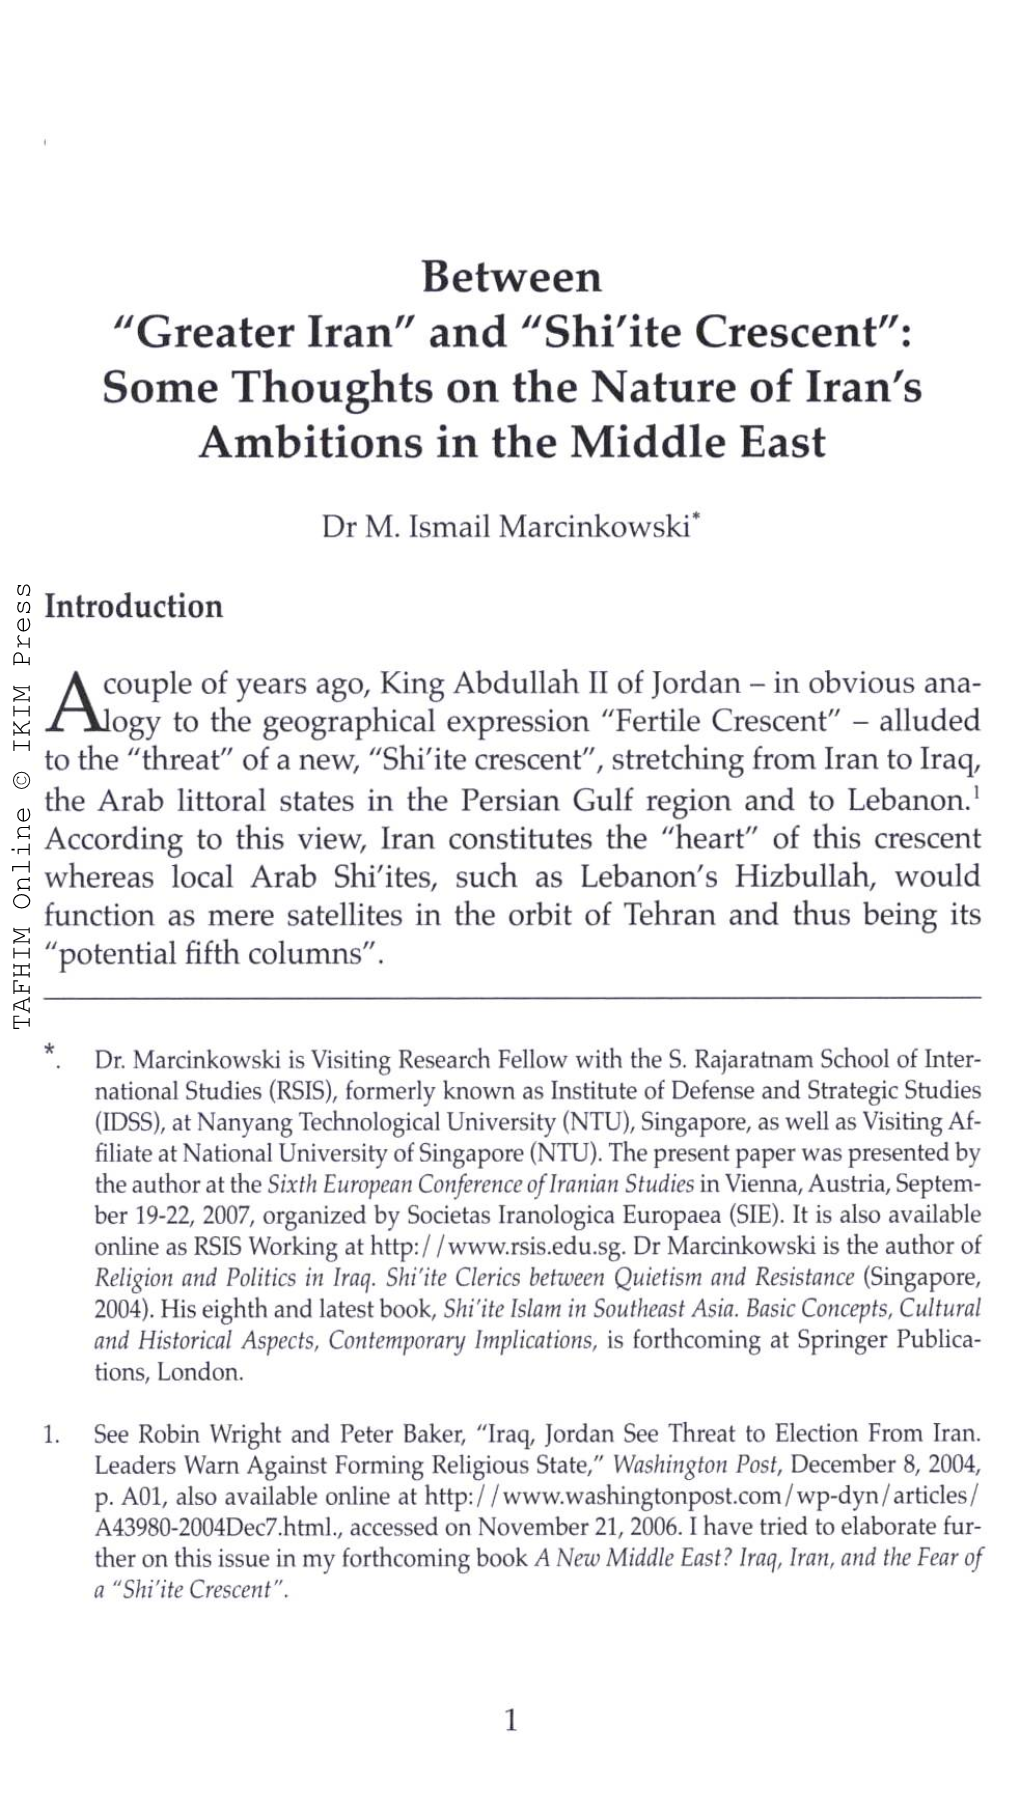 "Greater Iran" and "Shi'ite Crescent": Some Thoughts on the Nature of Iran's Ambitions in the Middle East